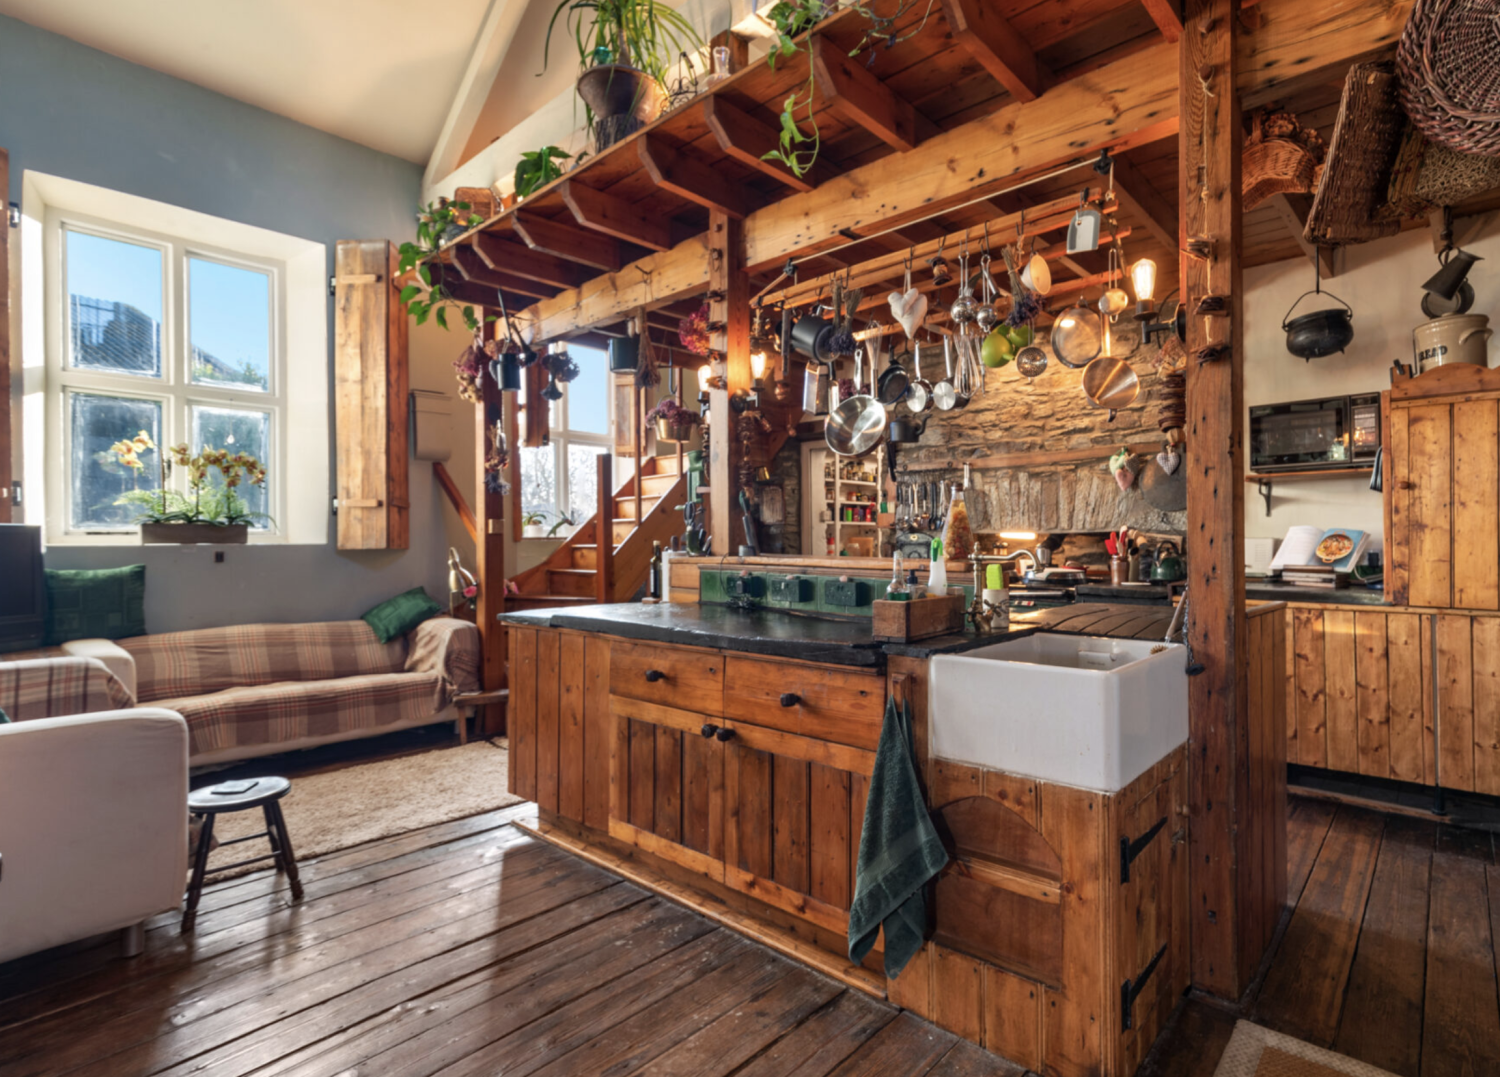 Interior of an old converted schoolhouse with a bespoke wooden kitchen and quirky layout